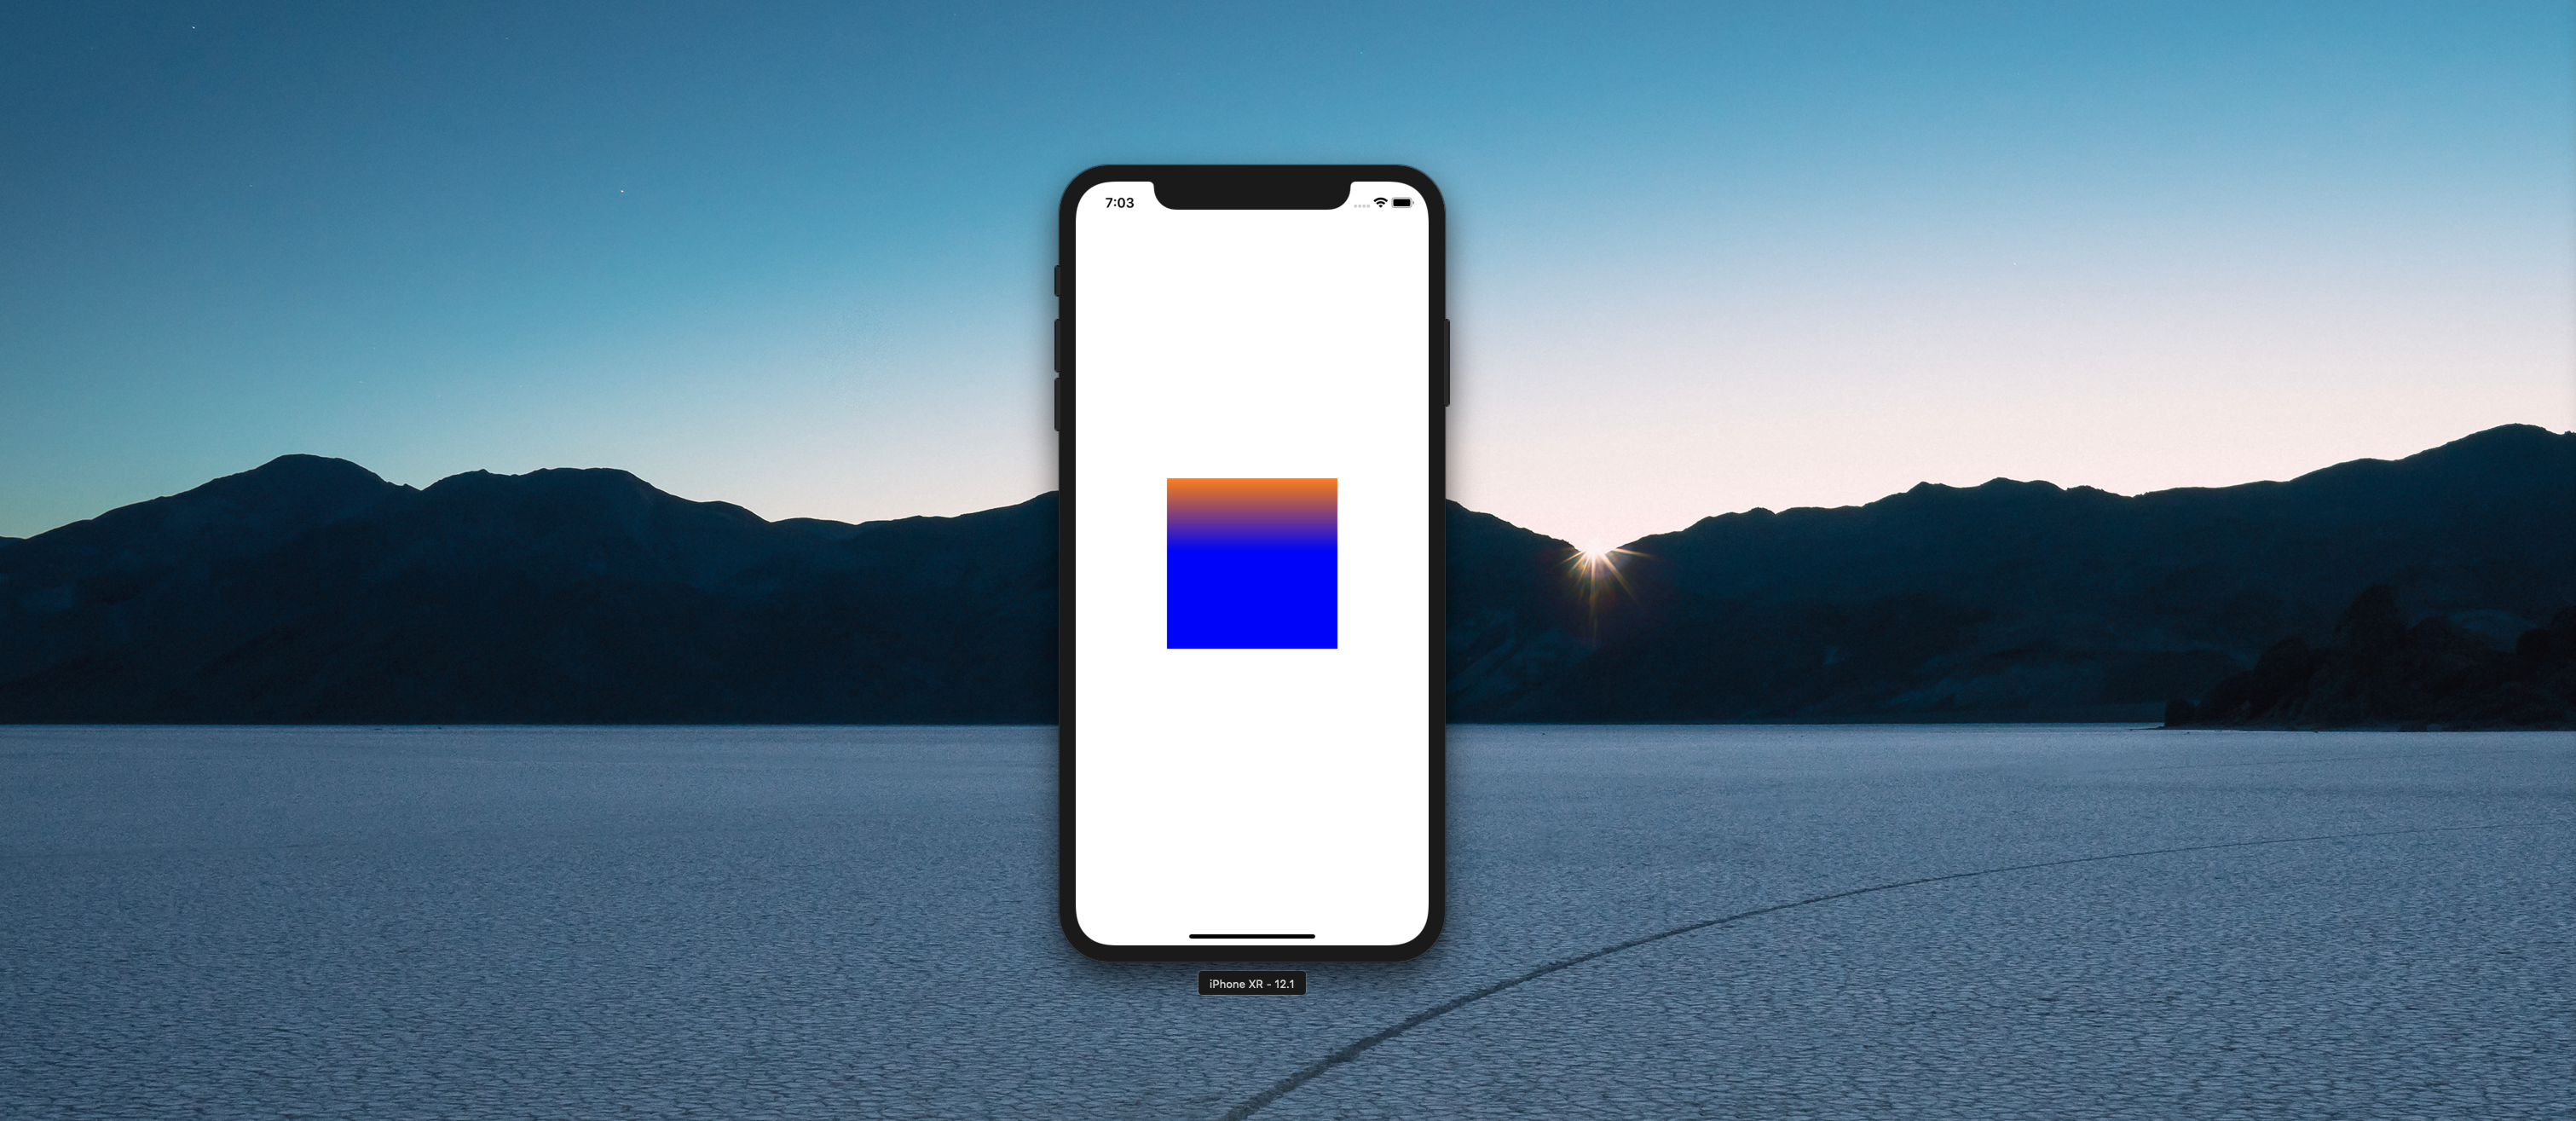 Animate Cagradientlayer With Cabasicanimation Learn Gradients In Swift Xcode By Max Nelson Maxcodes Itnext